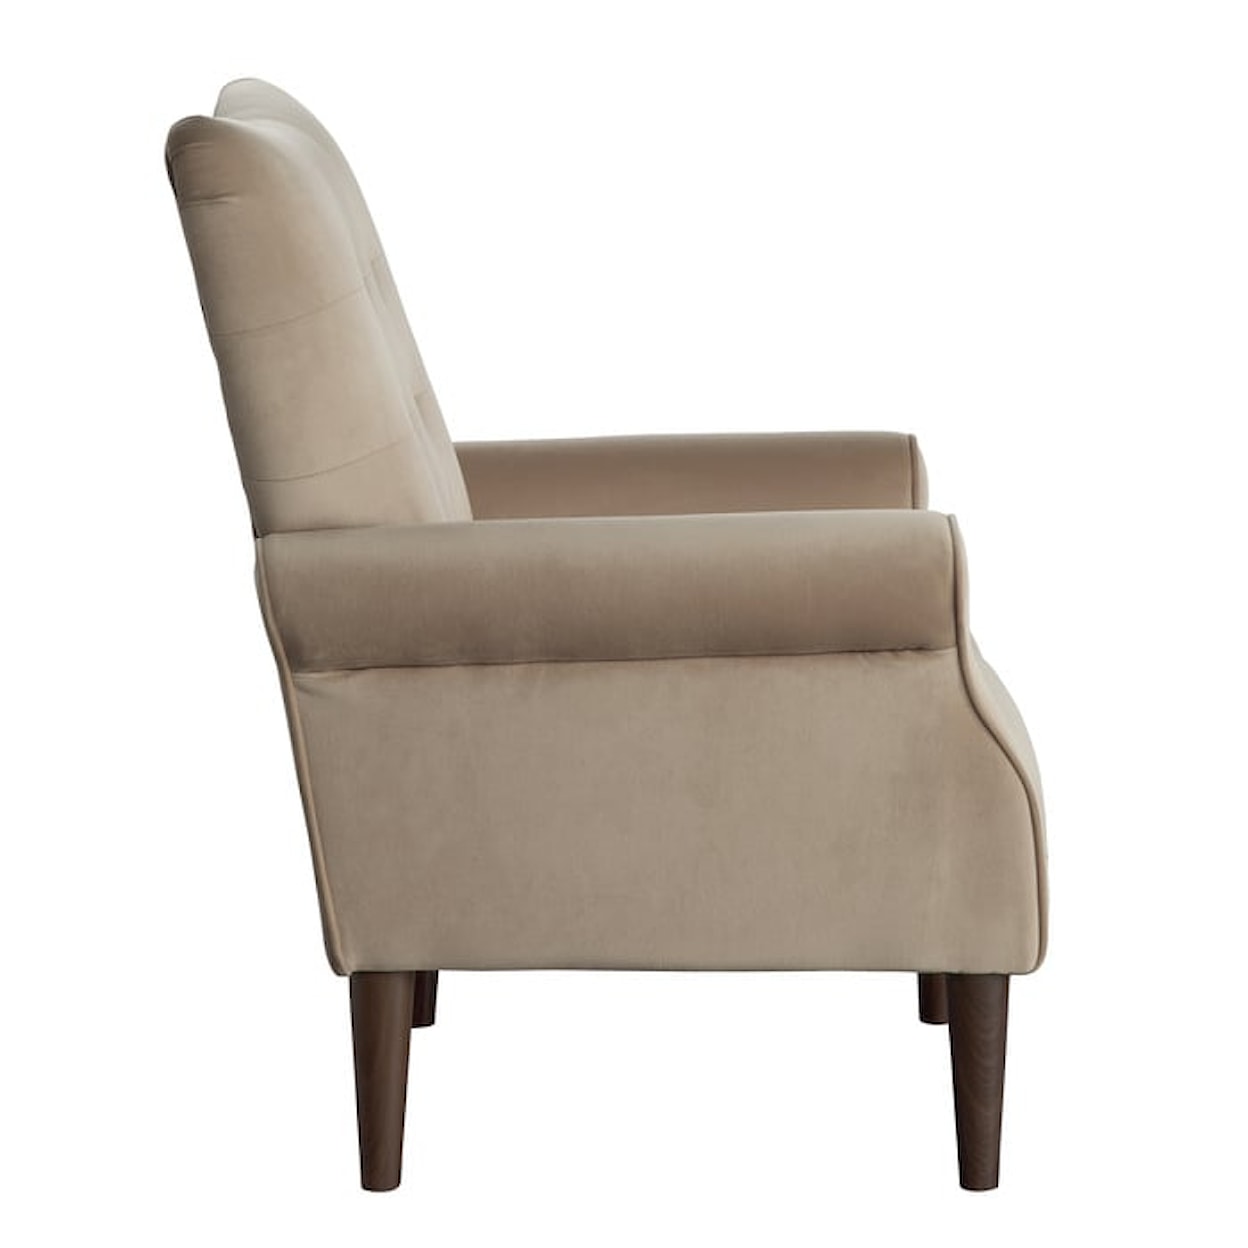 Homelegance Kyrie Accent Chair